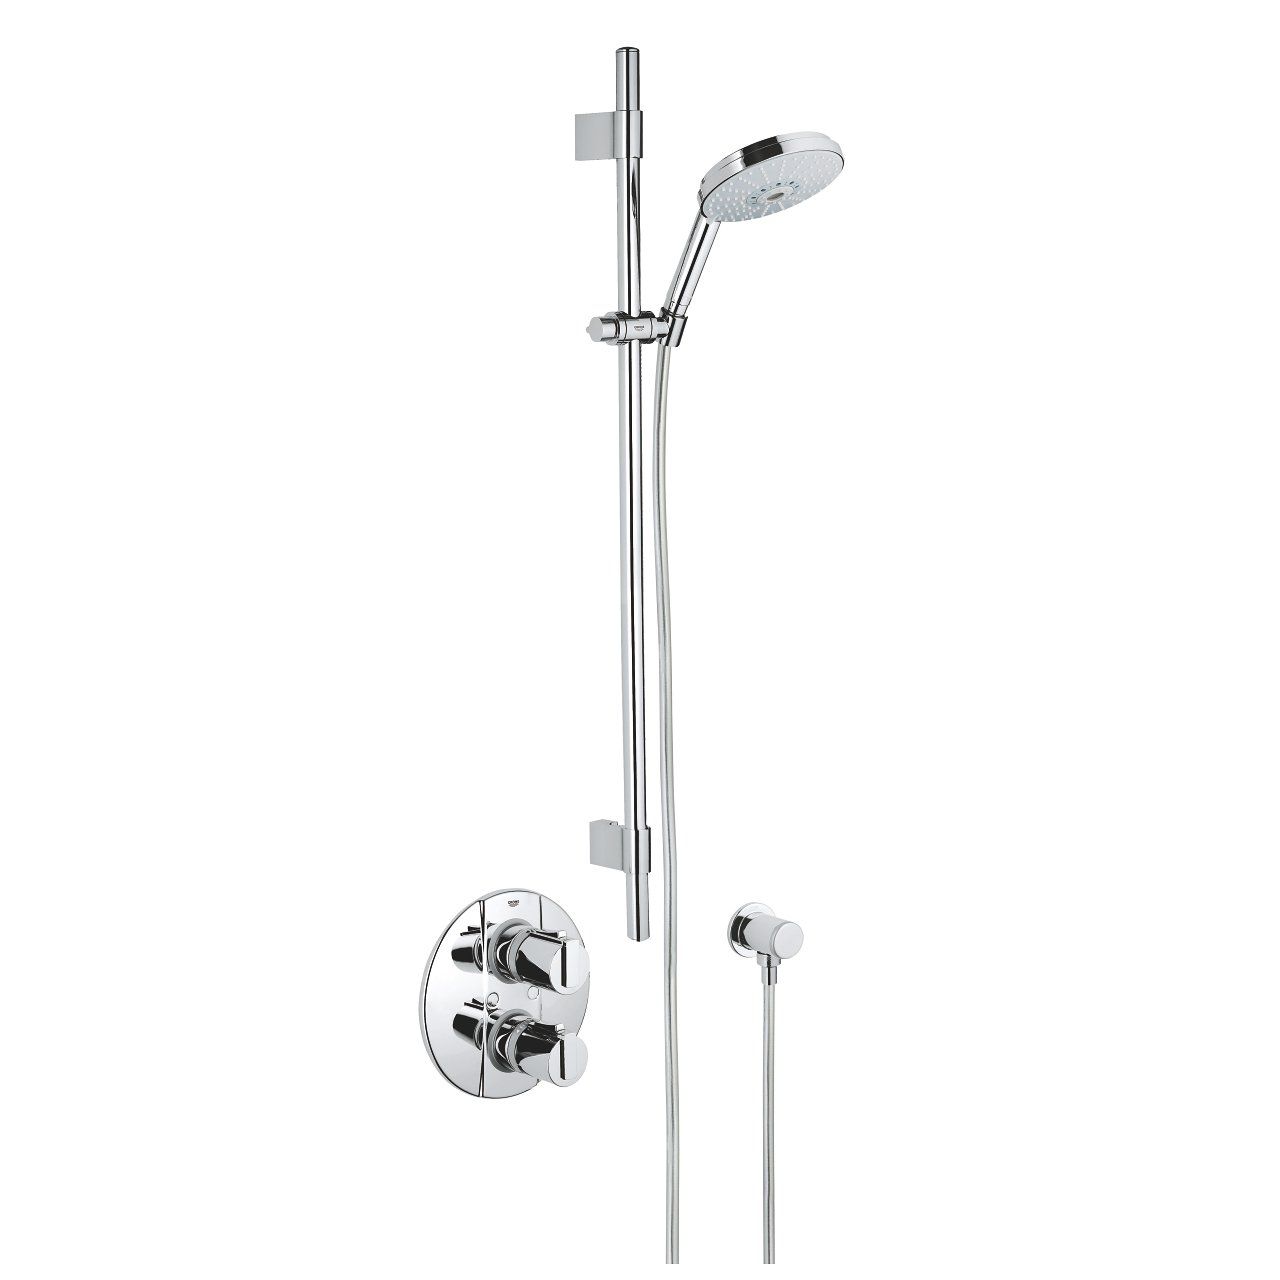  Grohe Grohtherm 2000 comfort set - 34282000 